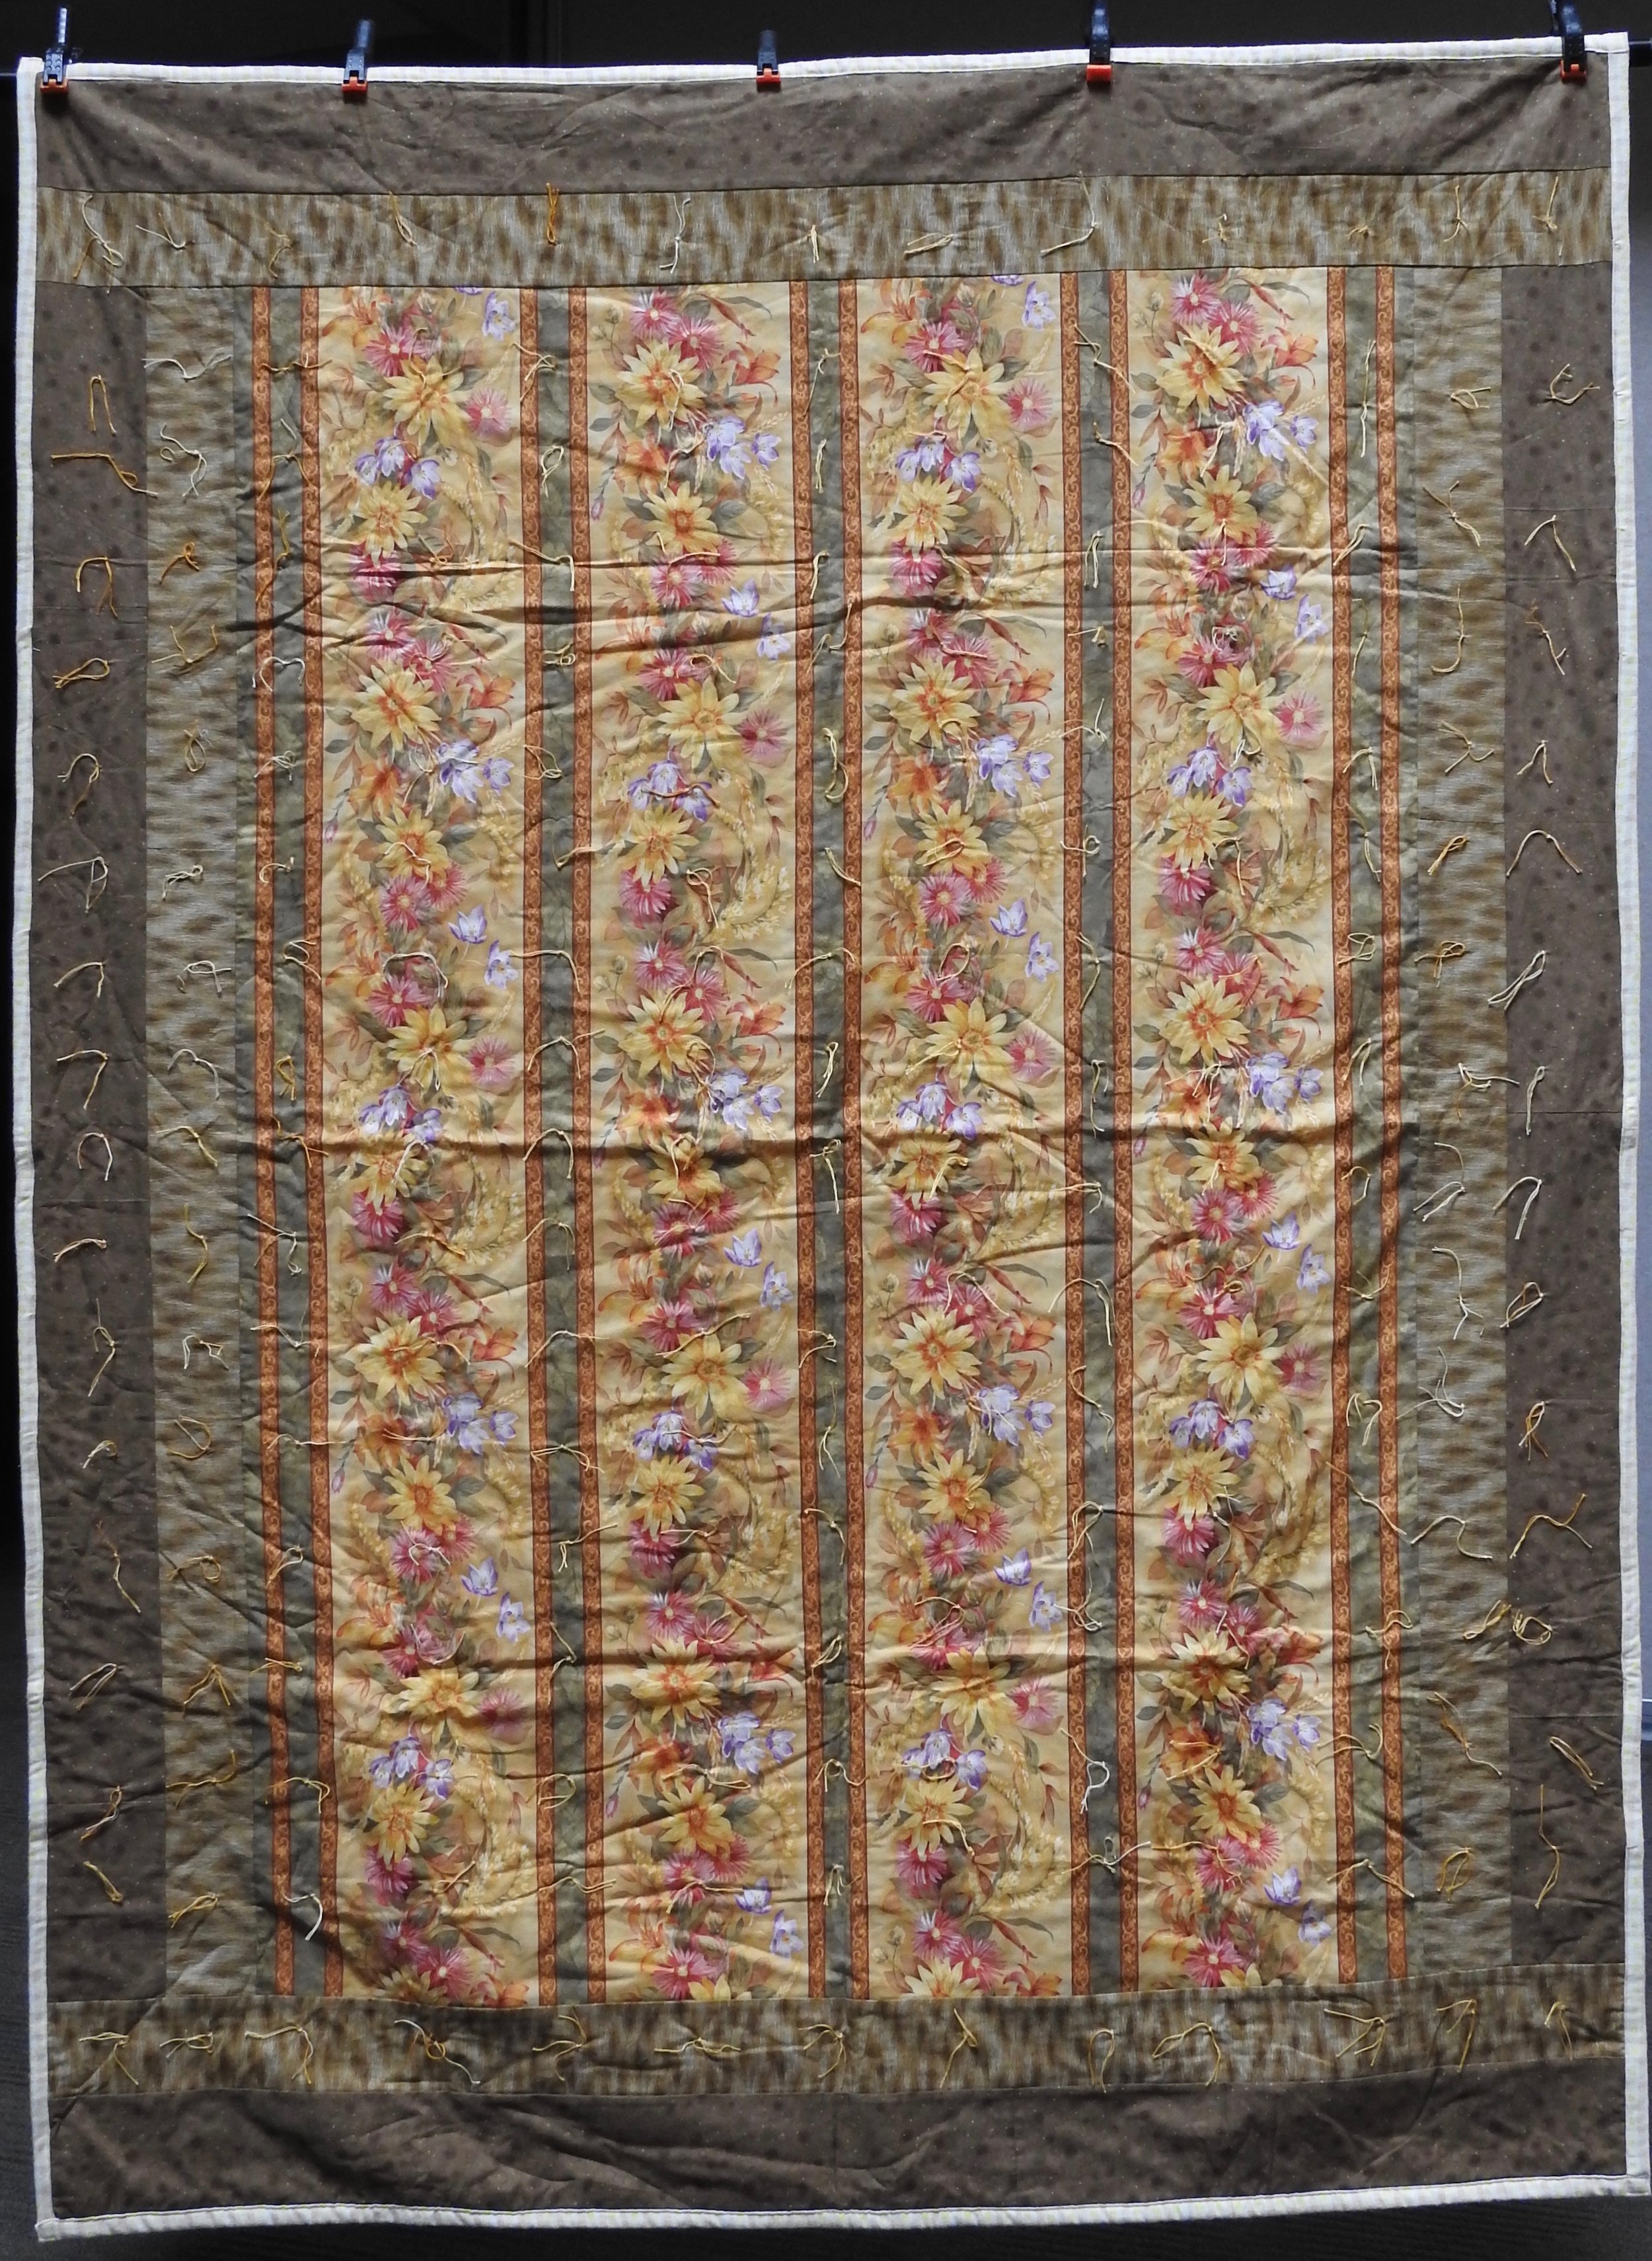  Summer Flowers Comforter, Pieced &amp; Knotted, donated by Howard-Miami Mennonite Church, 60 x 80”